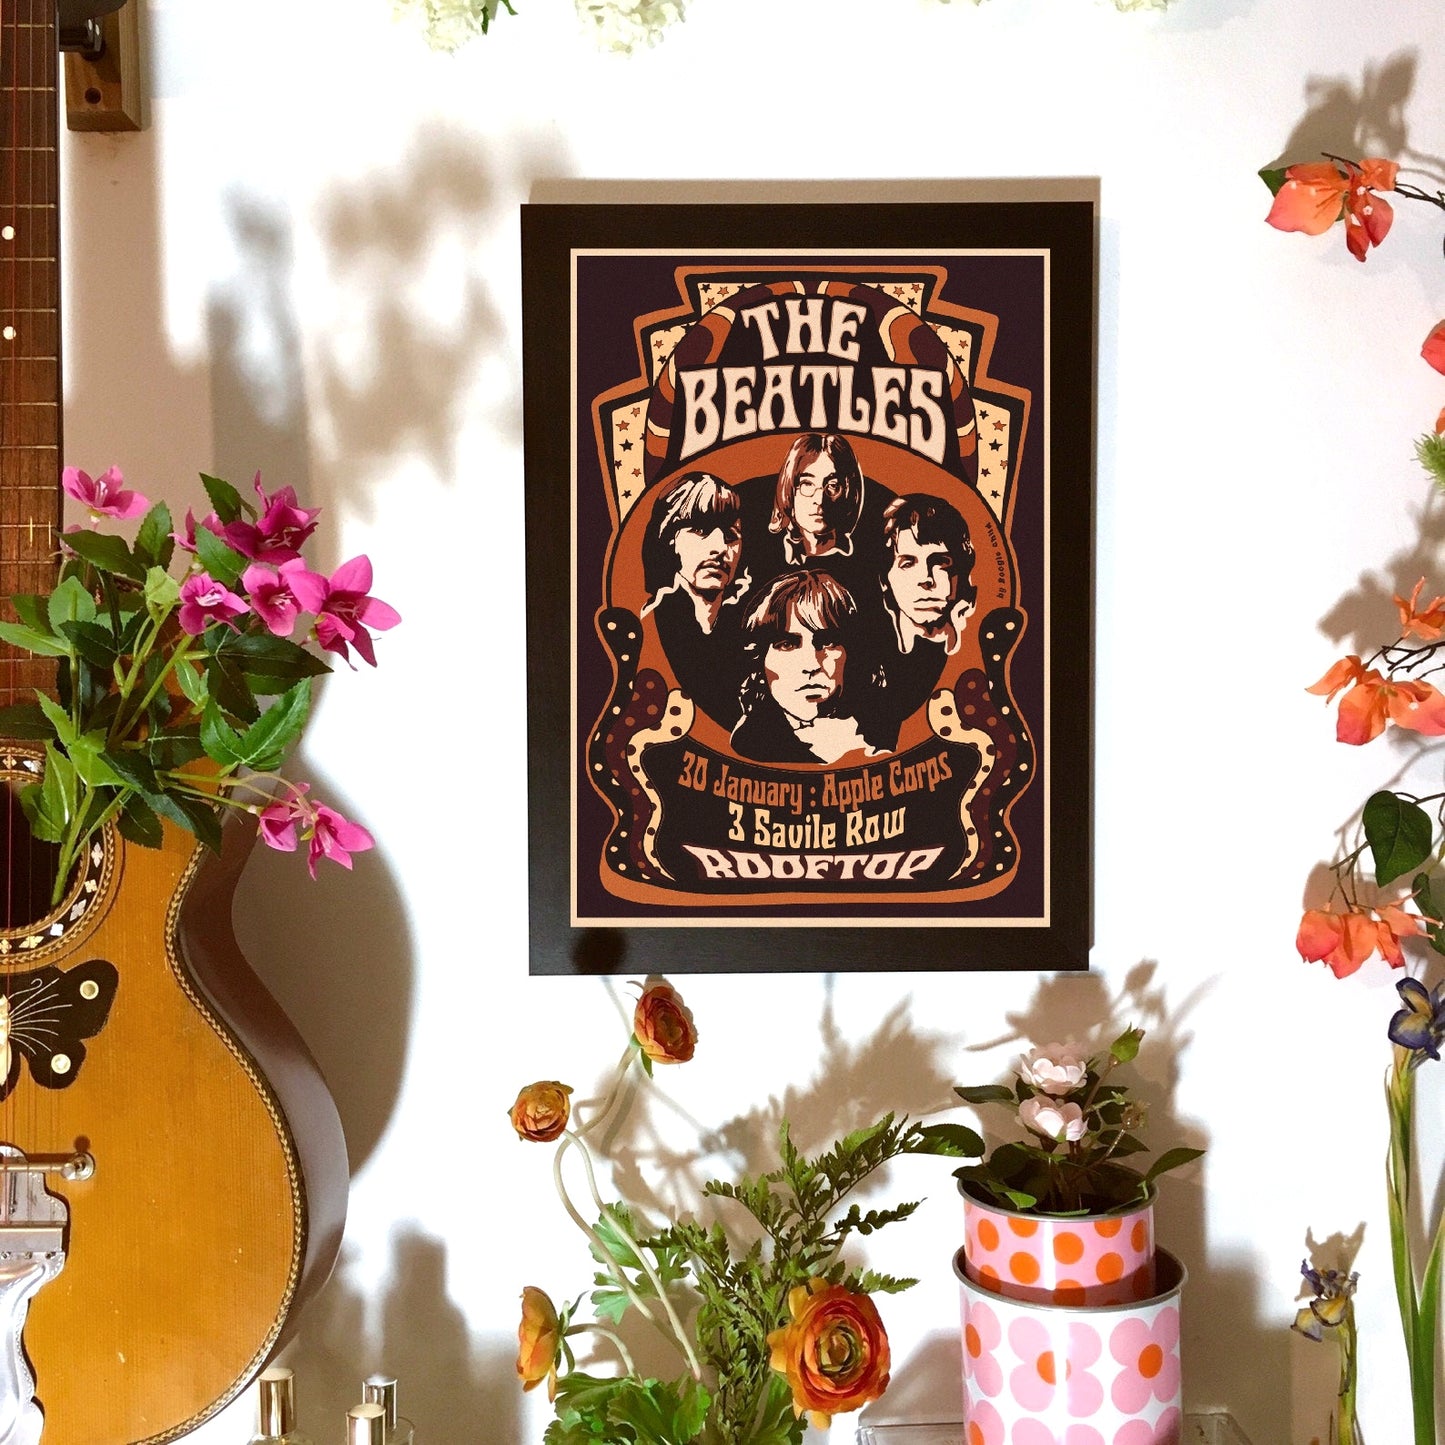 The Beatles Print, Limited Edition - Size A3 / 11.7" × 16.5"